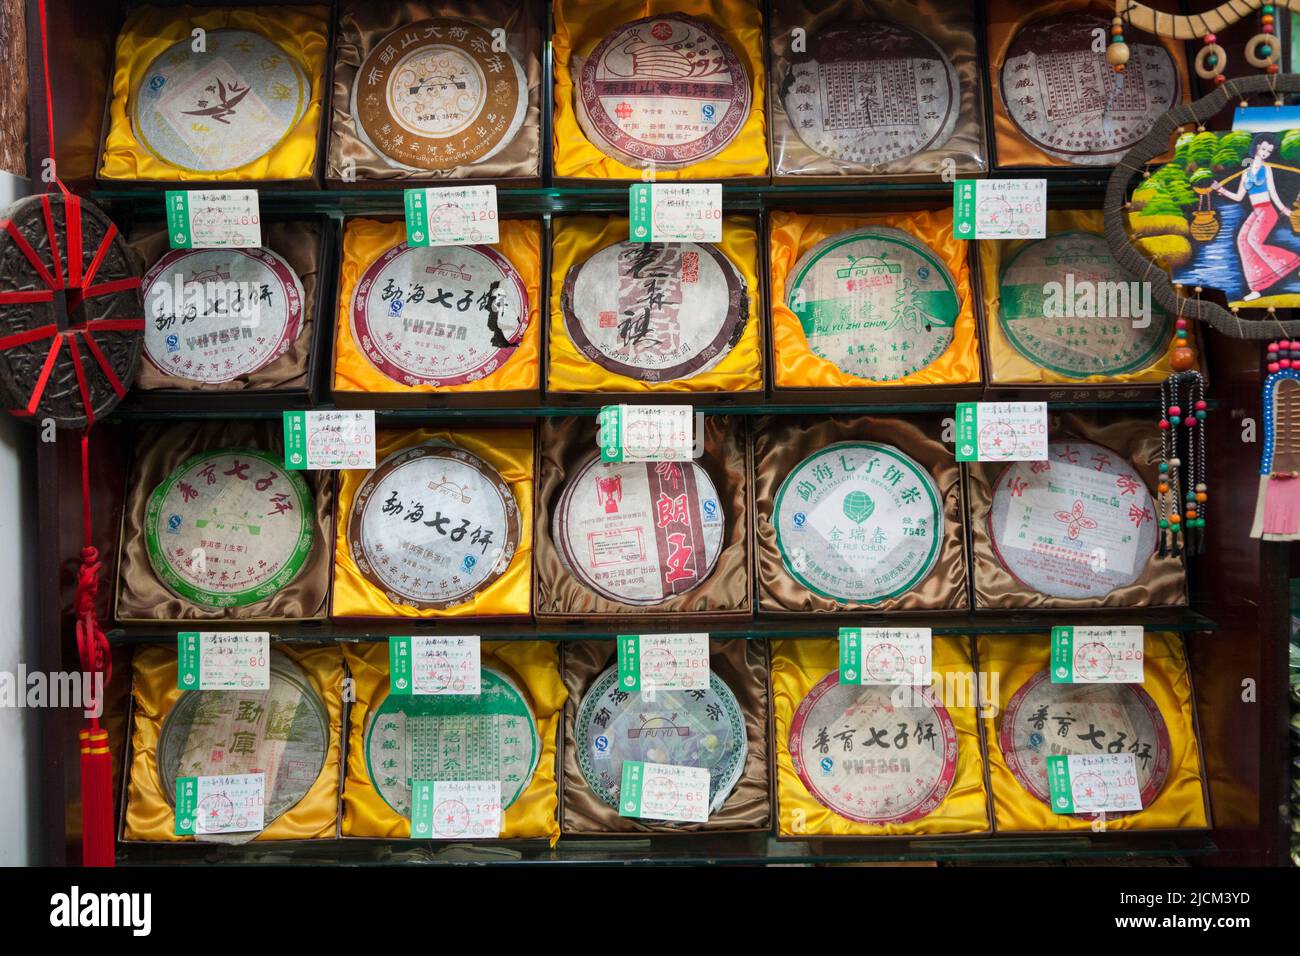 Display of tea some of which is described as which is 'cooked' / 'baked' and some described as 'raw', compressed into a cake rather than being sold as tea leaves. Xi'an. China. PRC. (125) Stock Photo